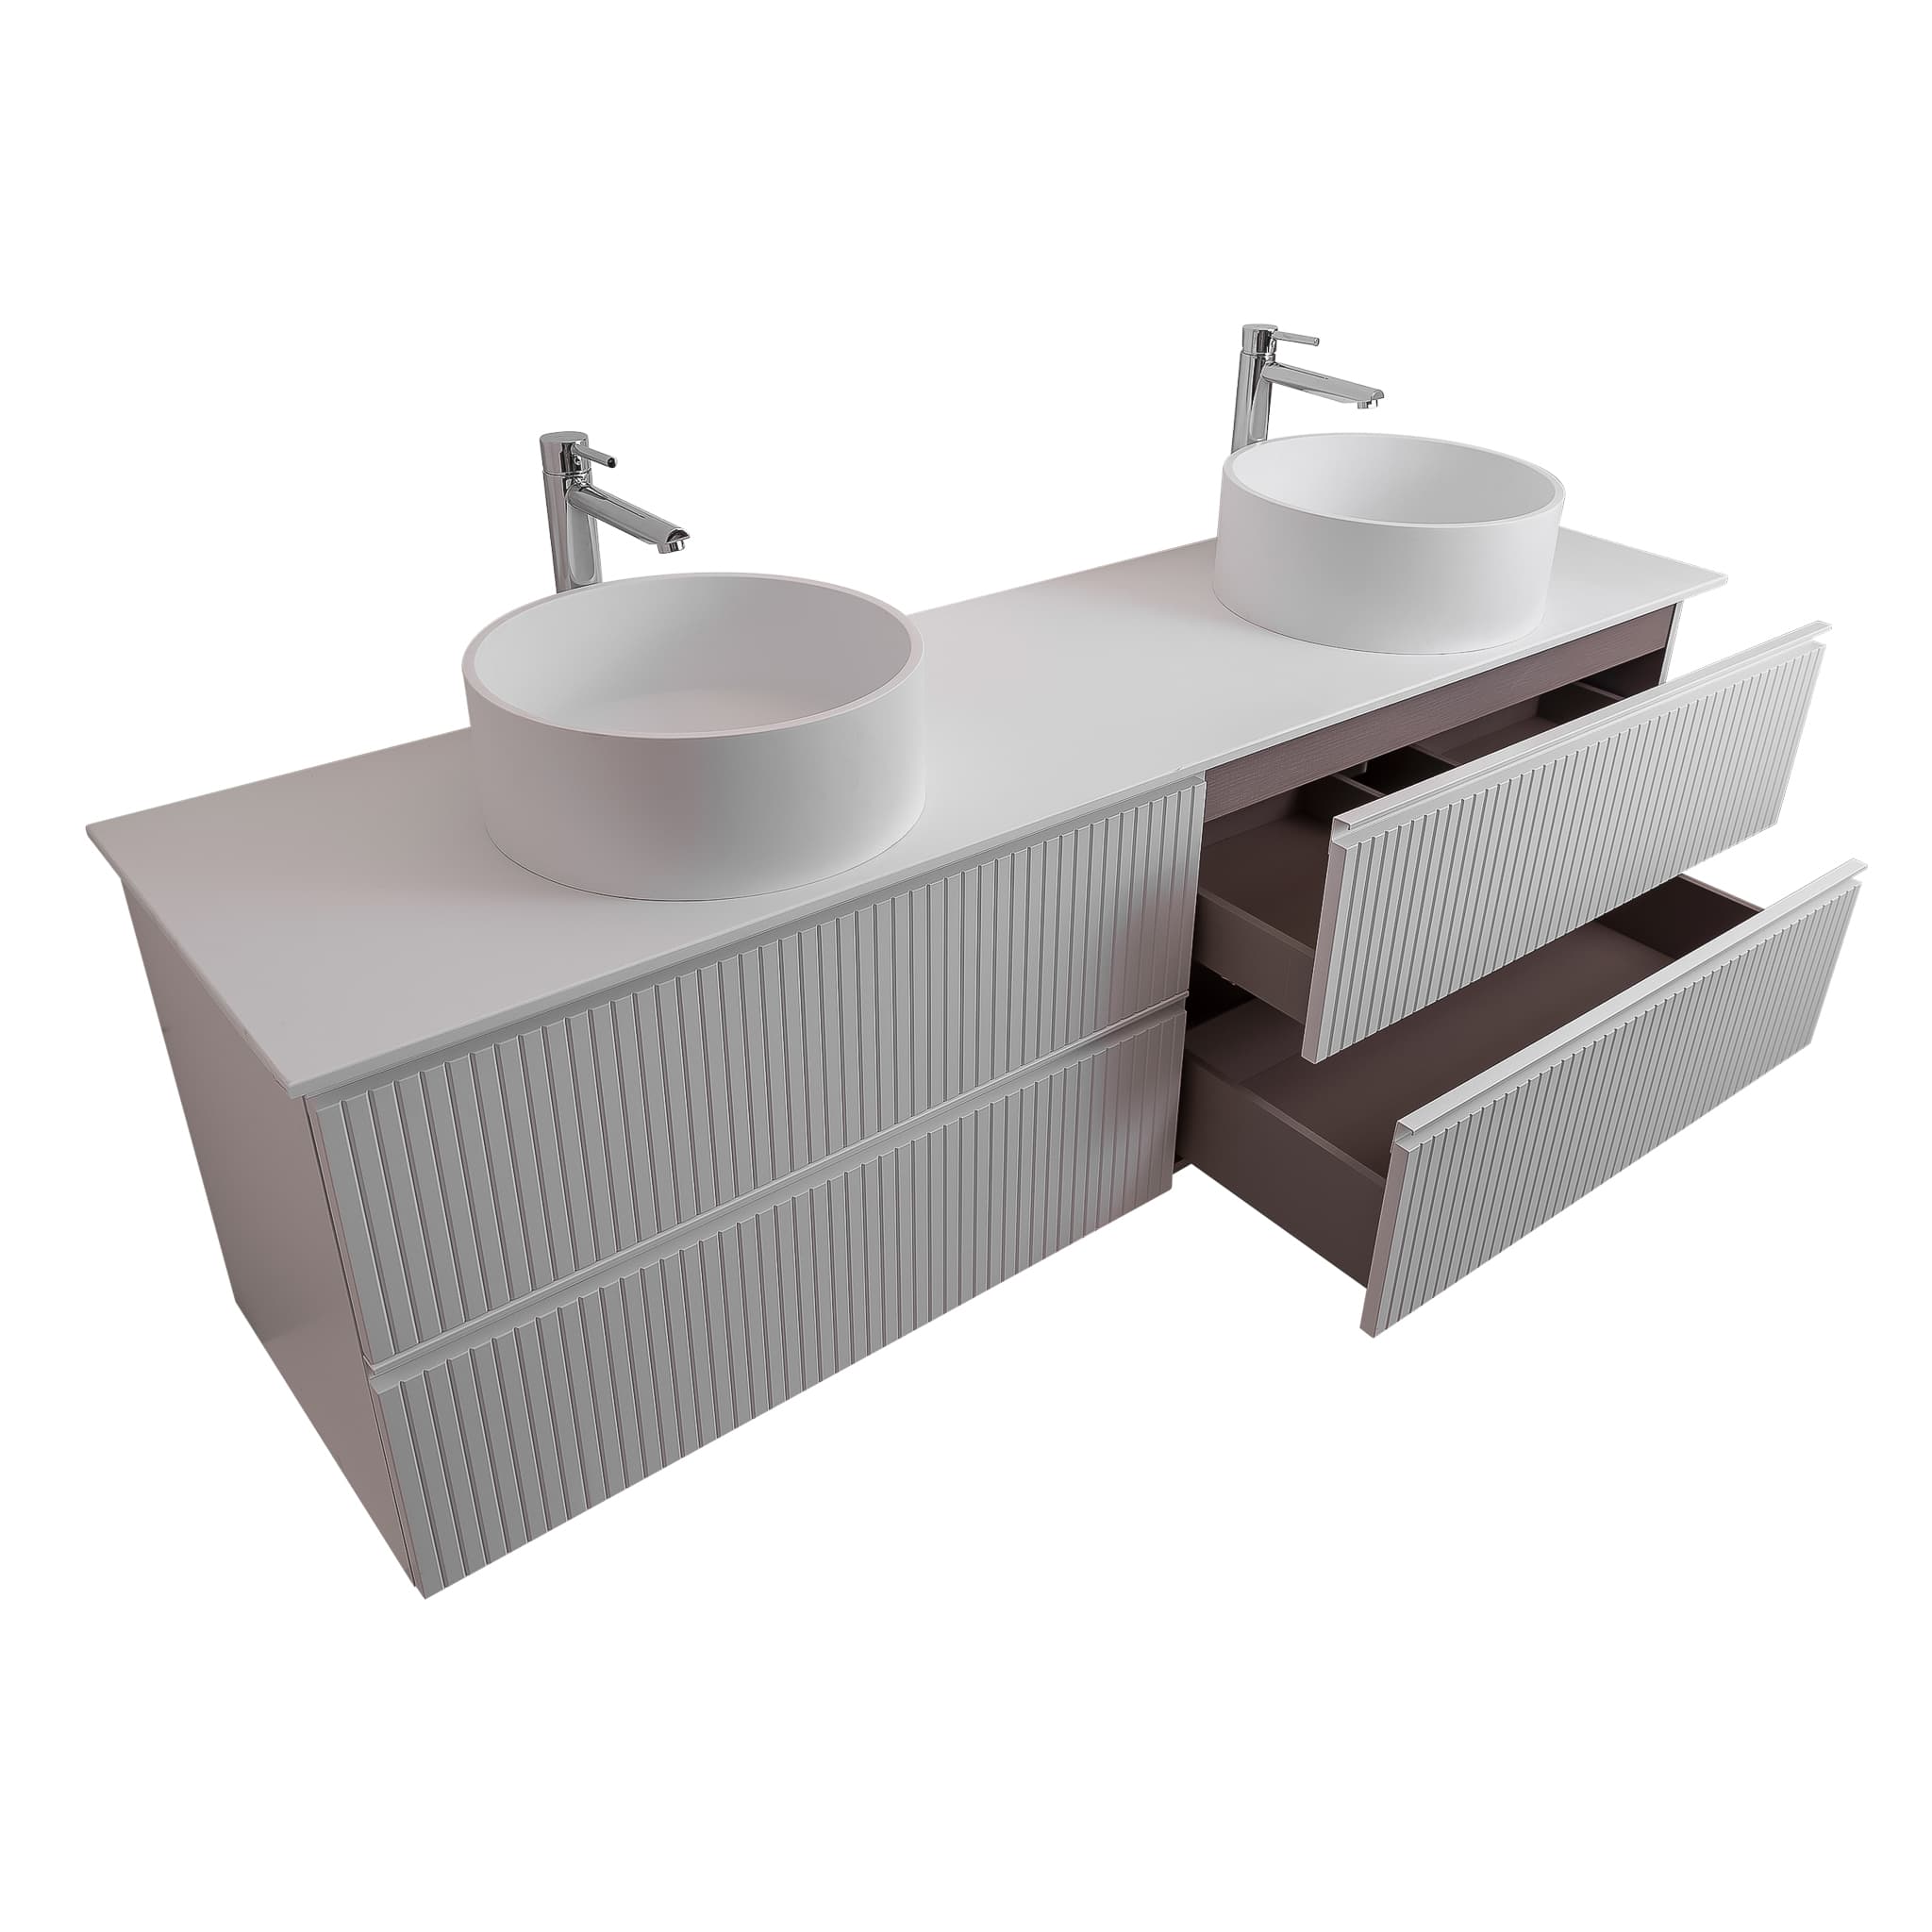 Ares 63 Matte White Cabinet, Solid Surface Flat White Counter And Two Round Solid Surface White Basin 1386, Wall Mounted Modern Vanity Set